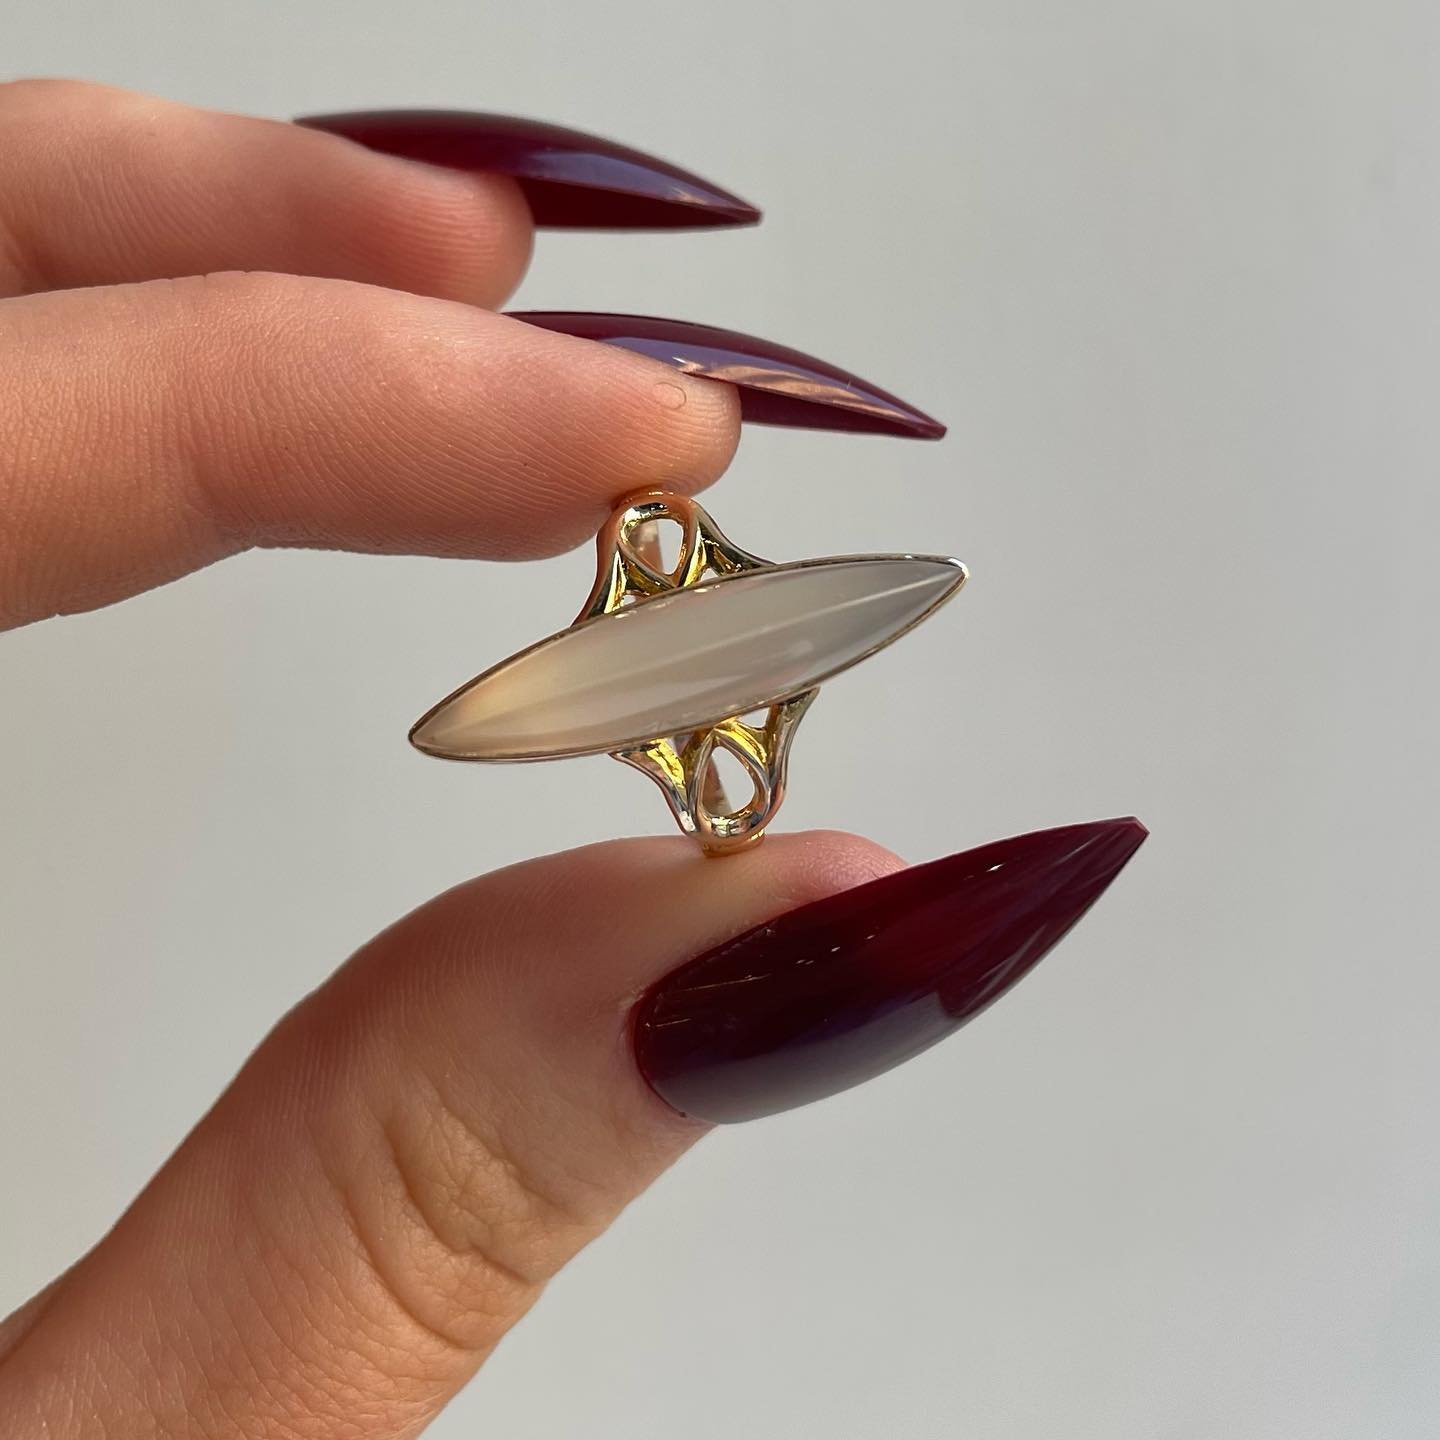 She&rsquo;s an icon, she&rsquo;s a legend &amp; this Vintage 10k yellow &amp; cabochon moonstone is a part of our $1000 and under section in the vintage shop. Give it a look! 
.
.
.
#moonstone #vintagejewelry #vintagestyle #vintagejewelrylover